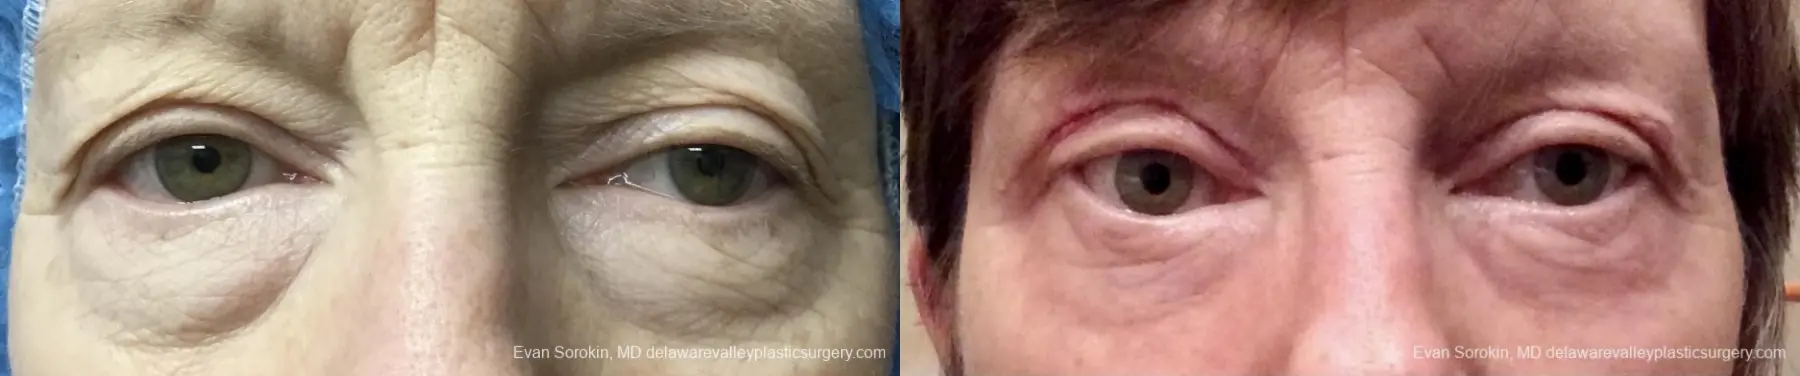 Blepharoplasty: Patient 2 - Before and After 1